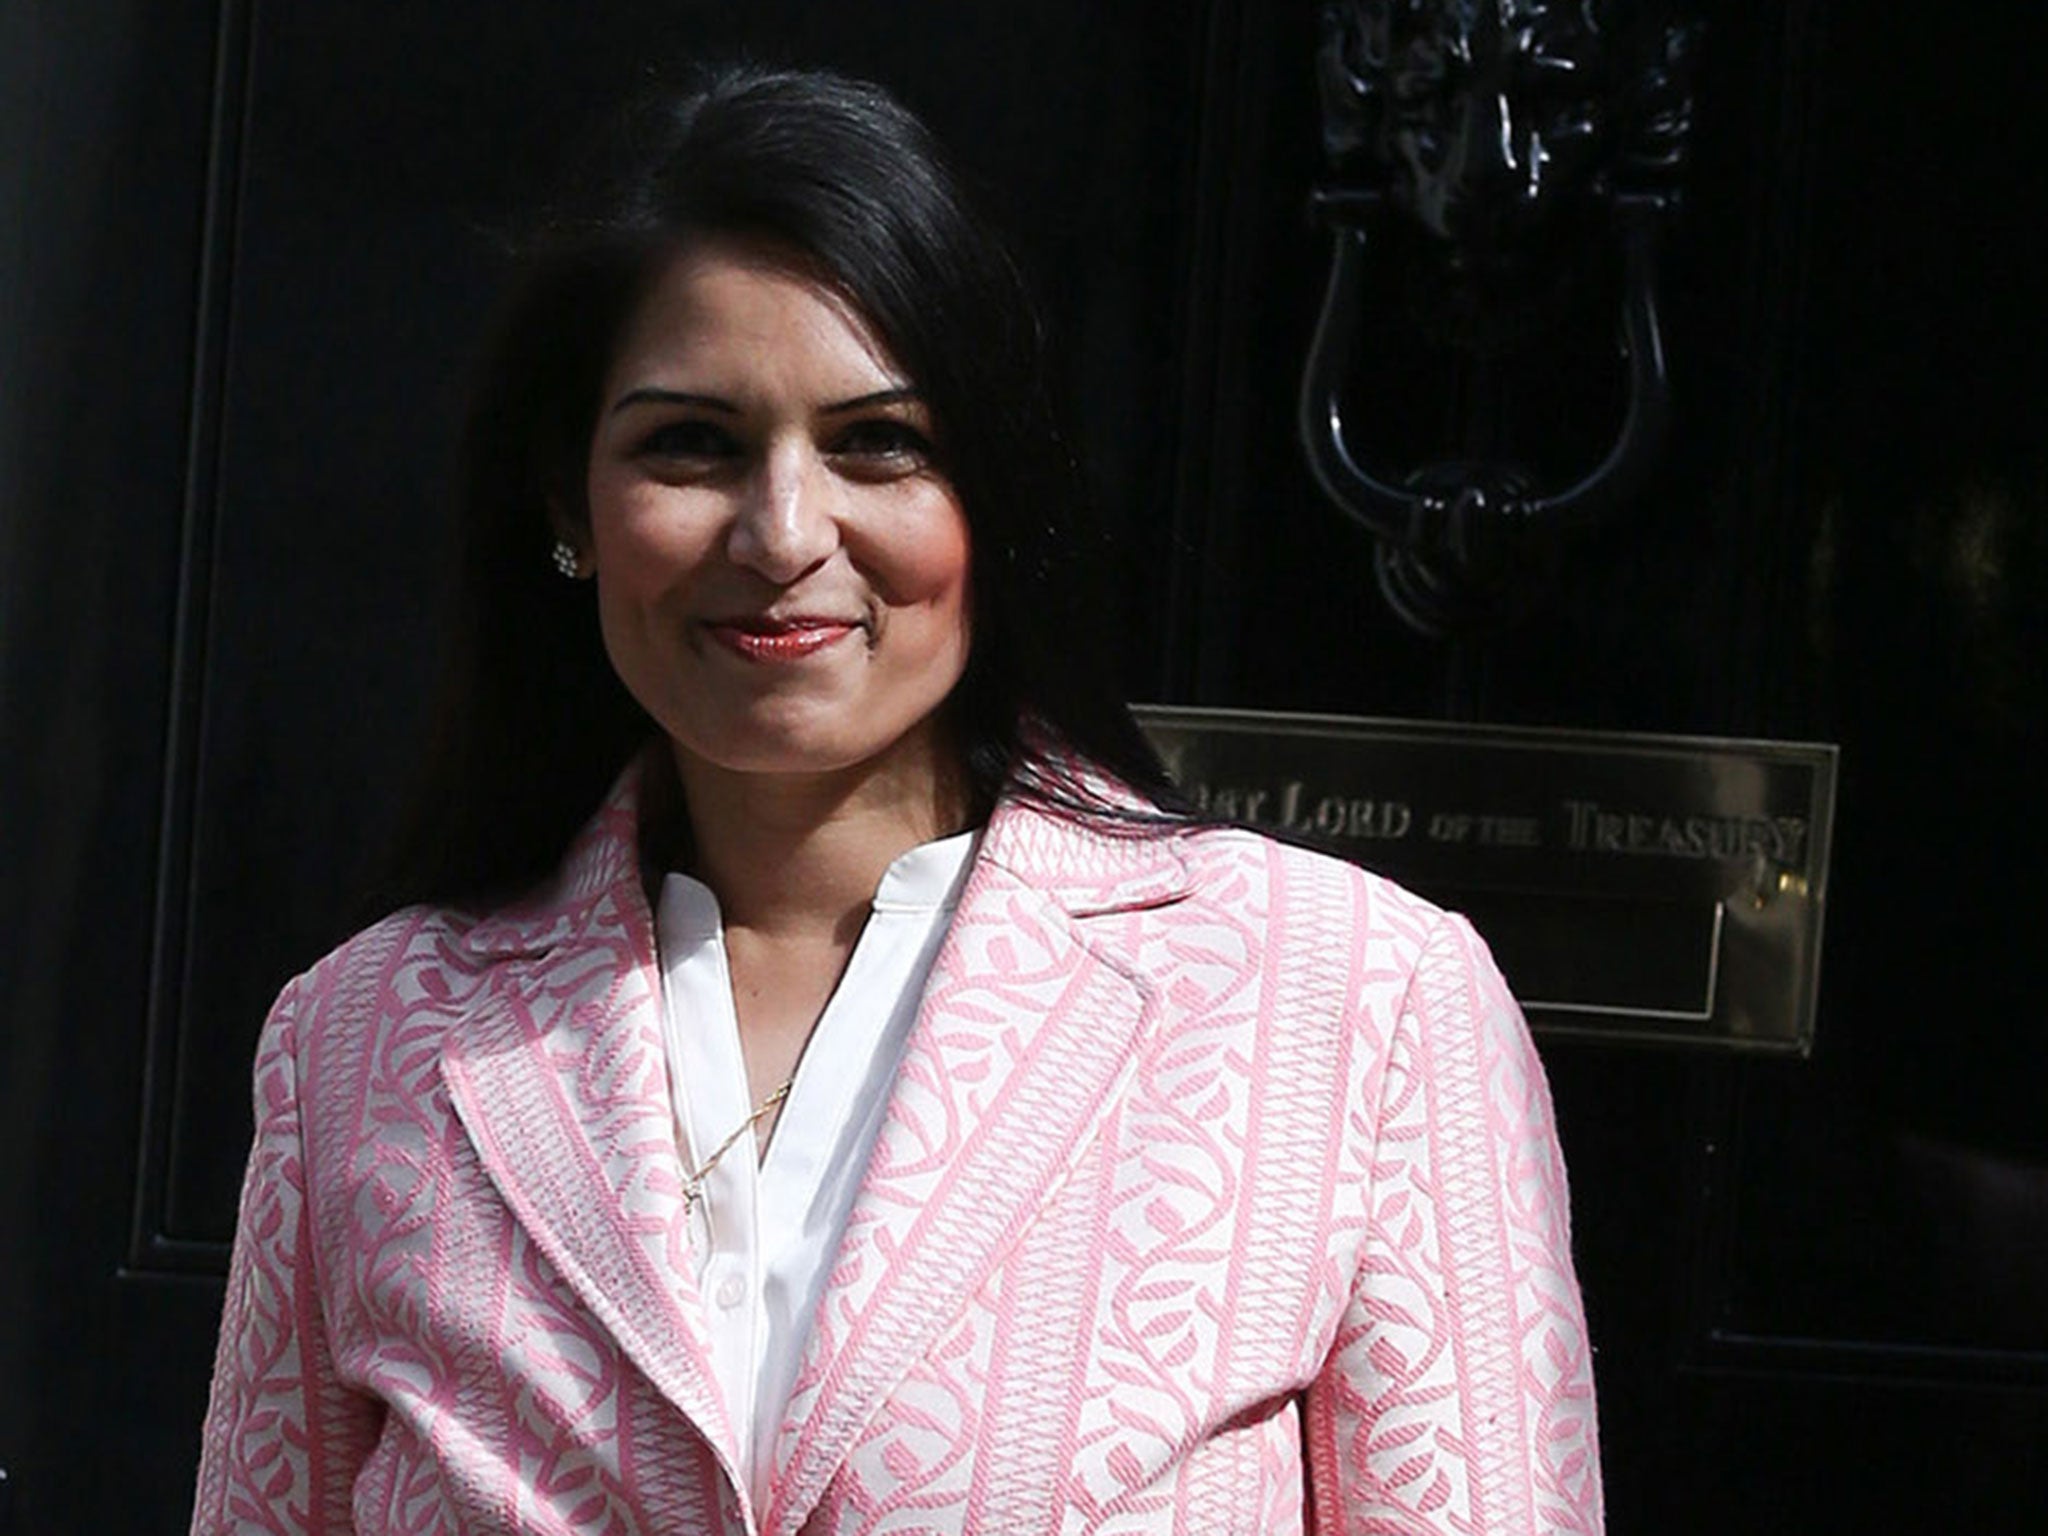 Priti Patel reportedly called a campaign group "thugs"